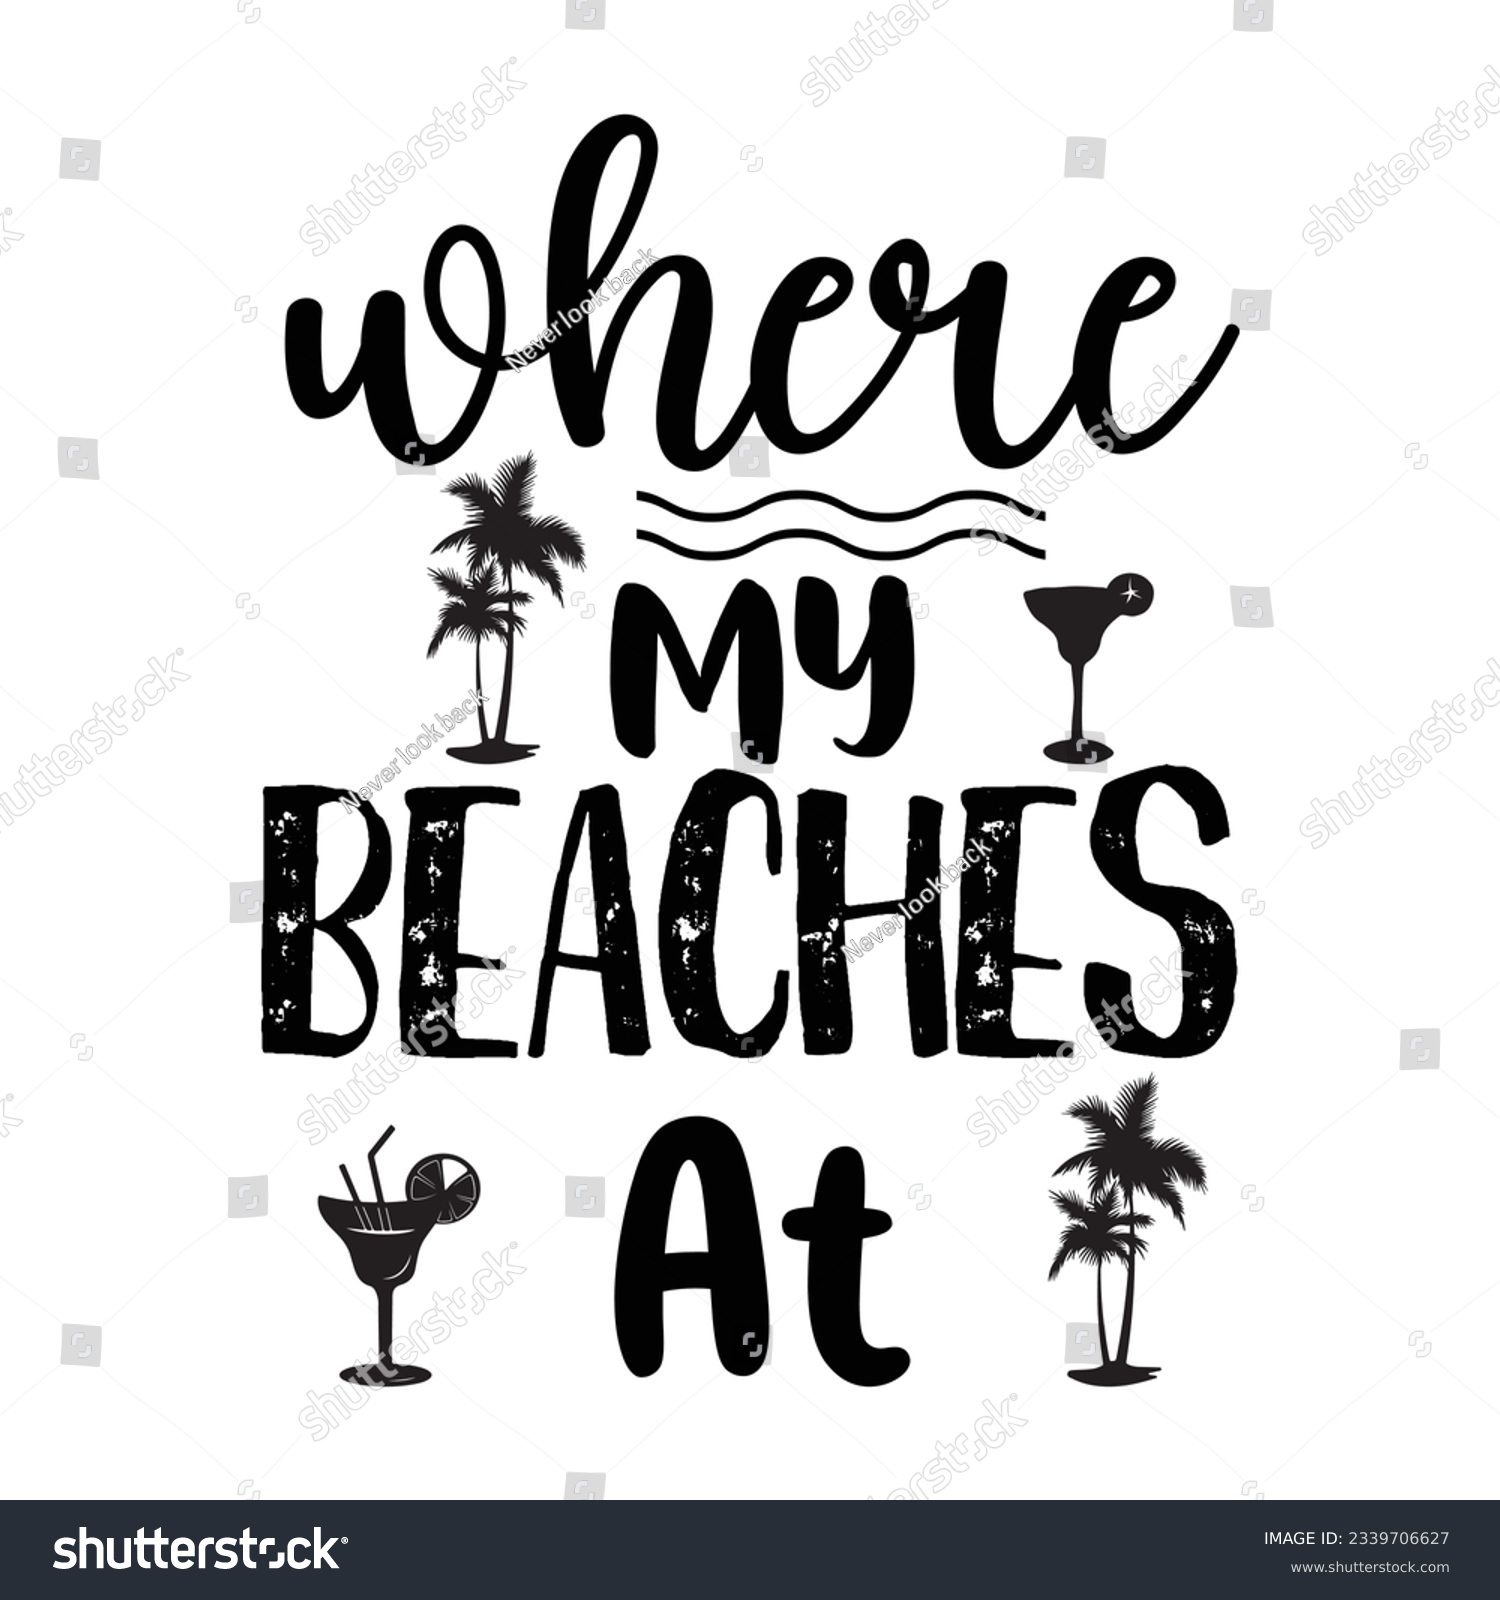 SVG of where my beaches at SVG t-shirt design, summer SVG, summer quotes , waves SVG, beach, summer time  SVG, Hand drawn vintage illustration with lettering and decoration elements
 svg